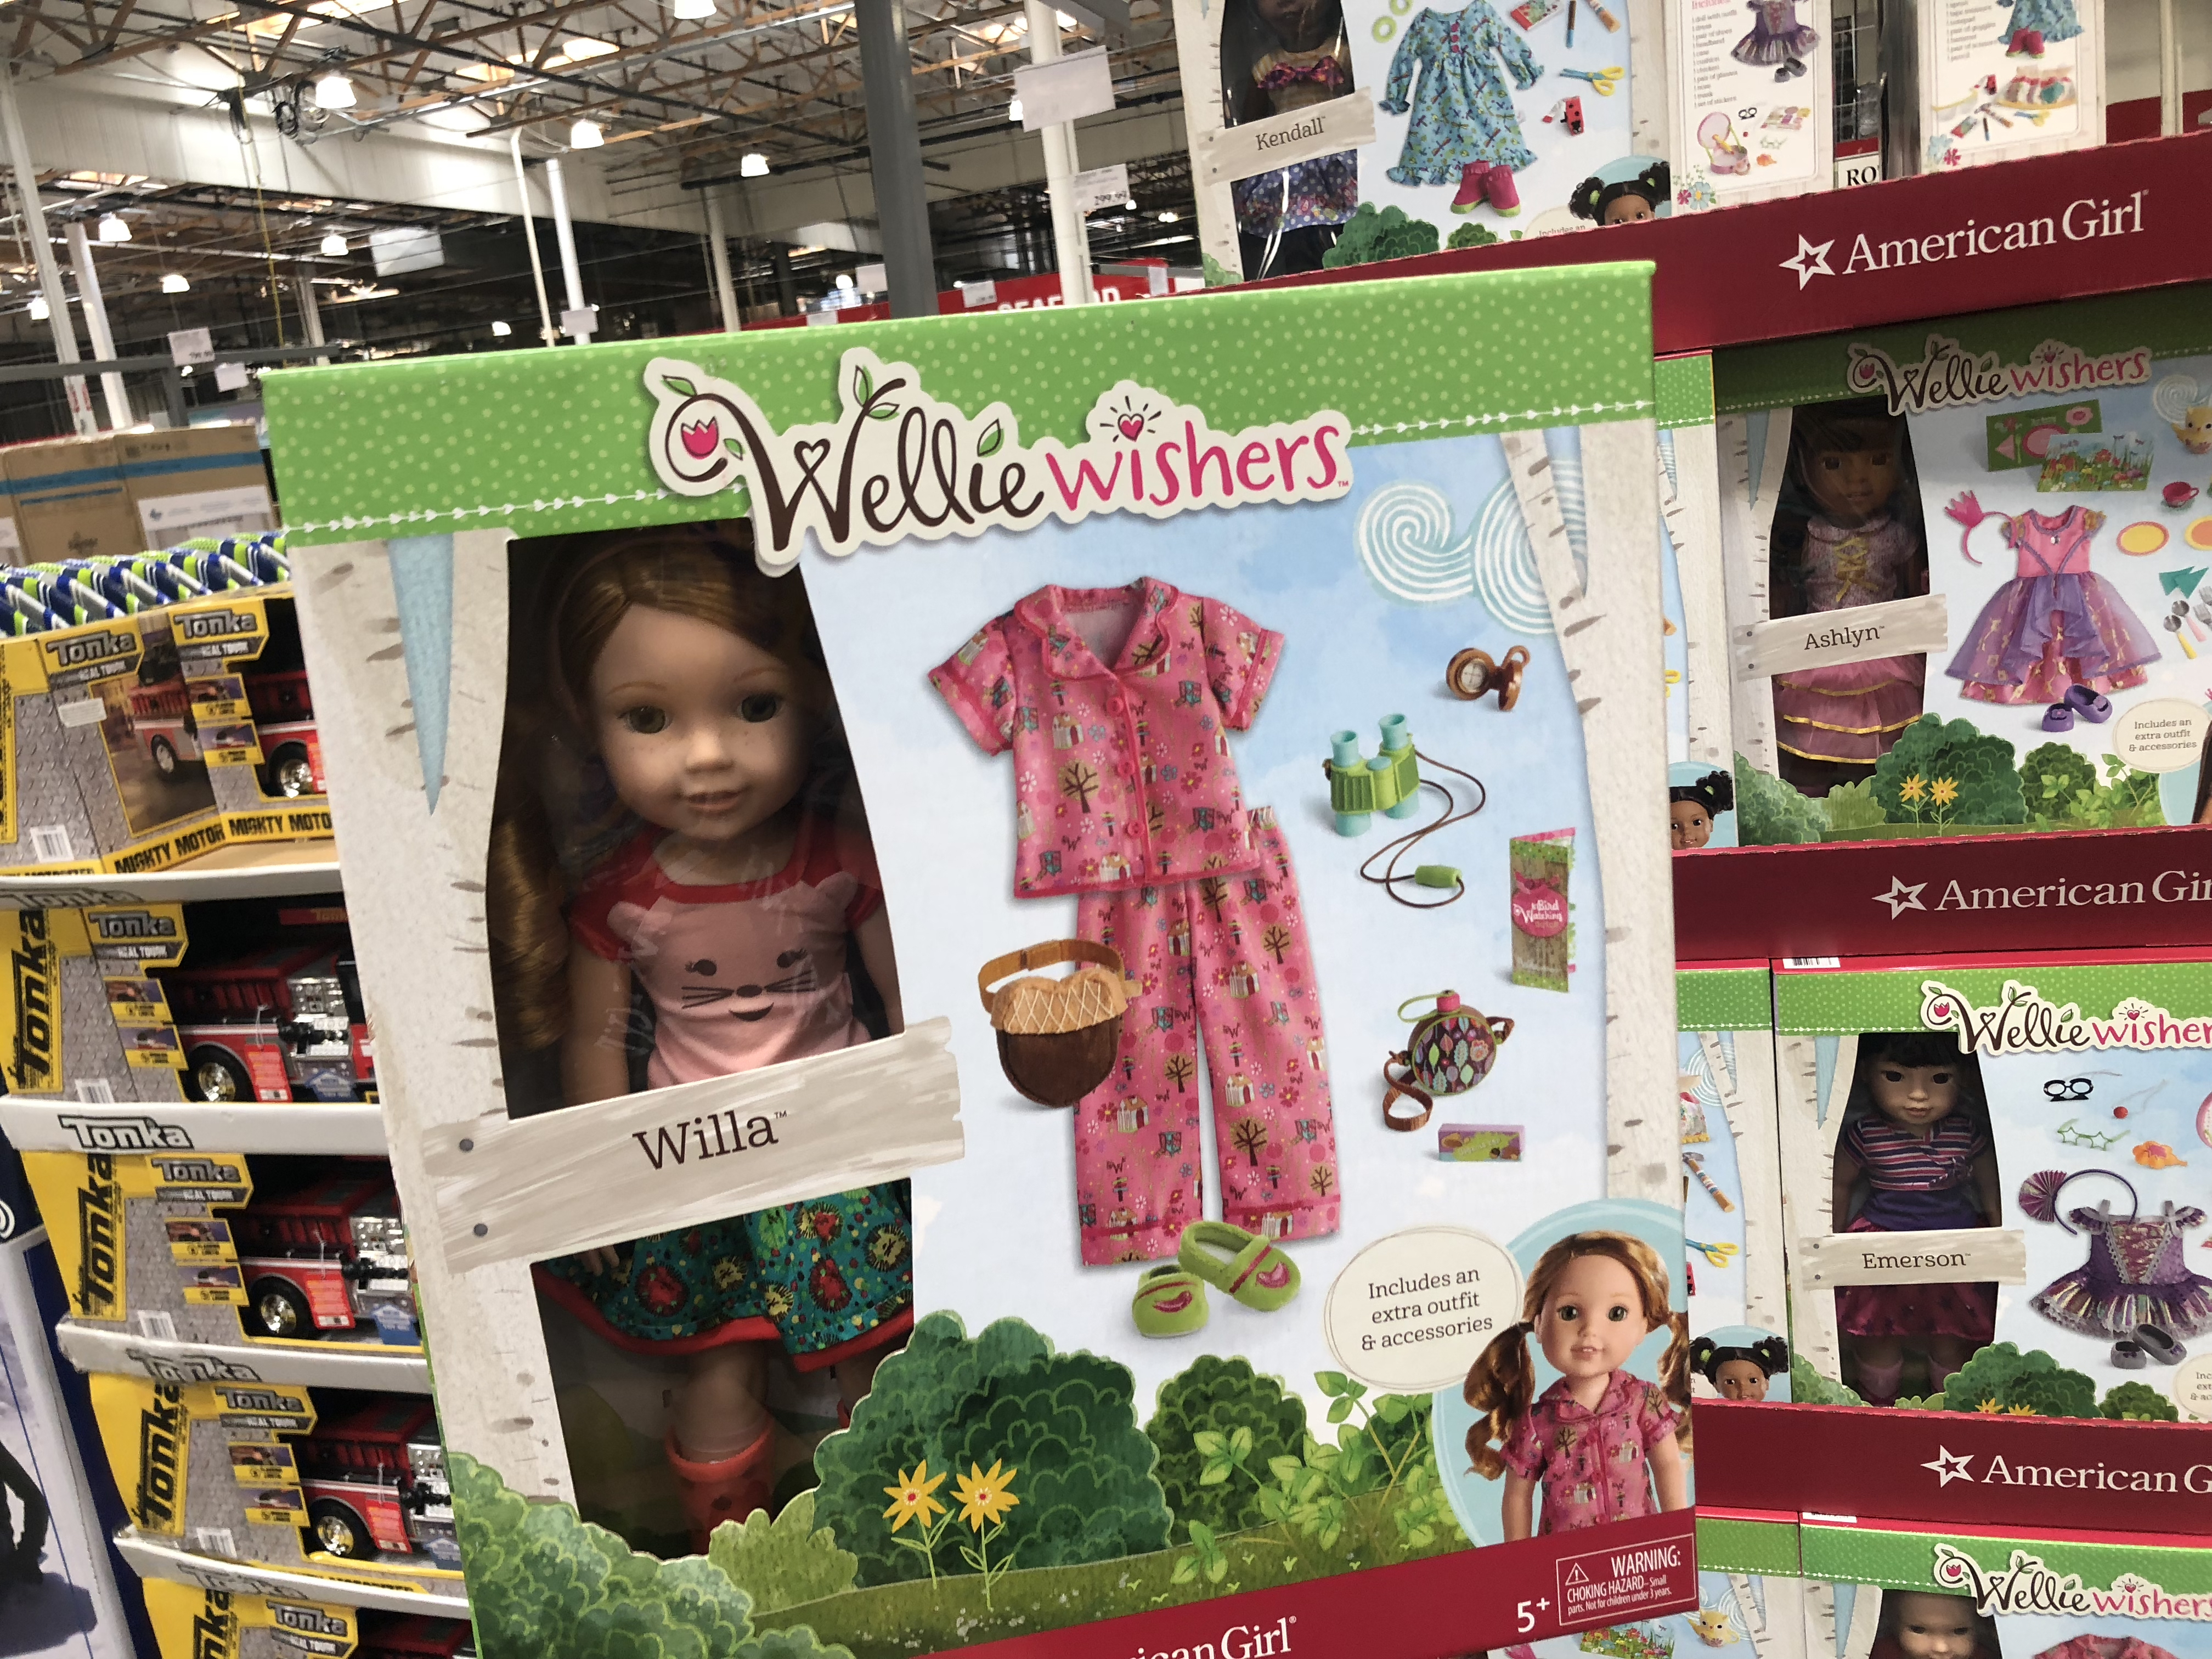 The best holiday toy deals for 2018 include American Girl WellieWishers at Costco